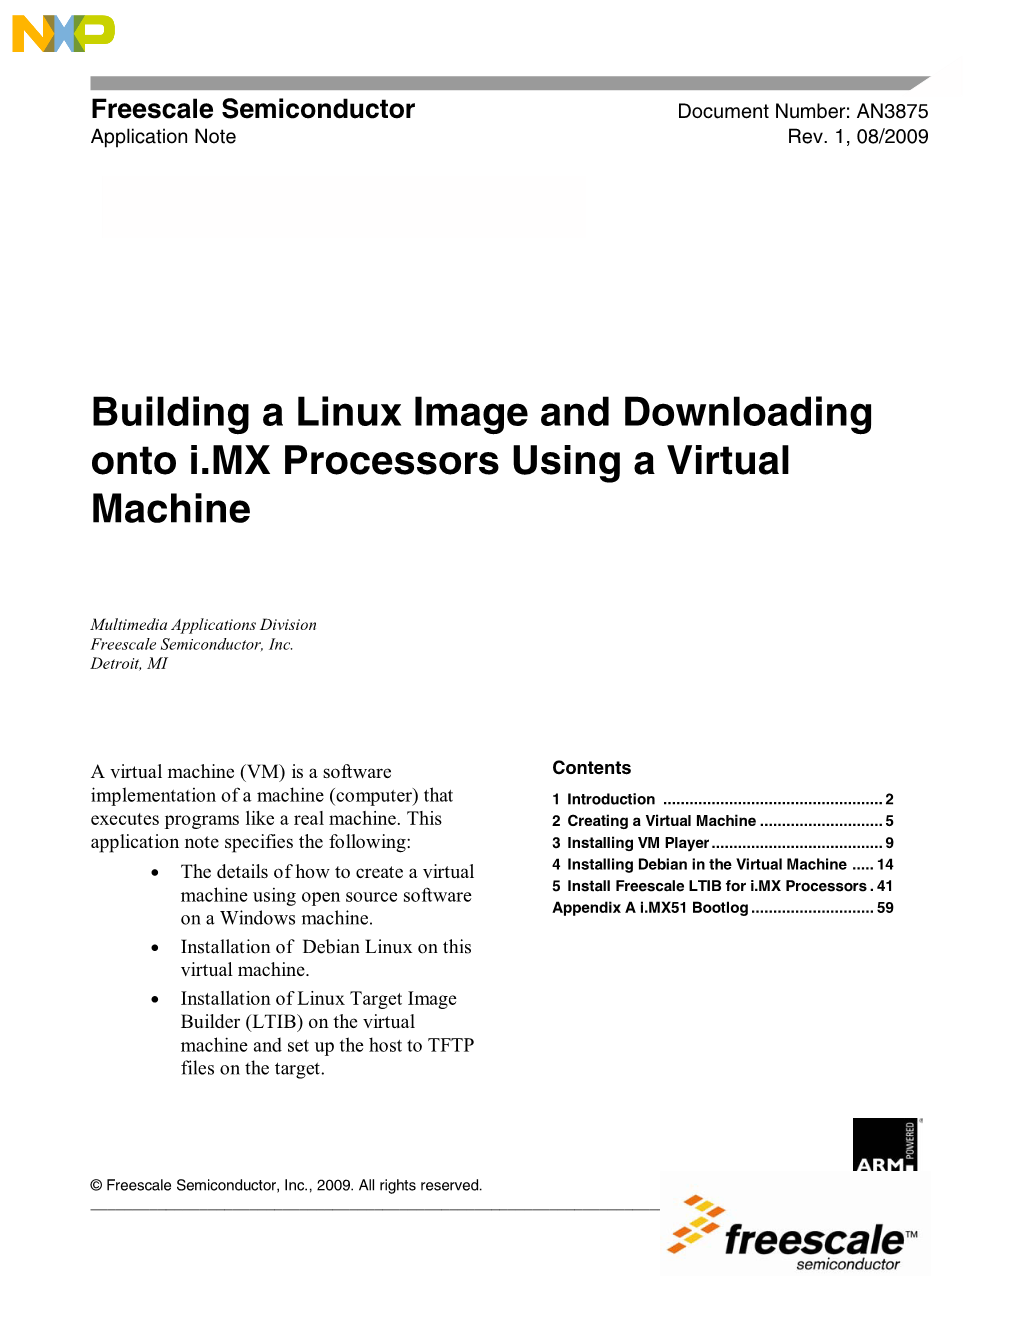 Building a Linux Image and Downloading Onto I.MX Processors Using a Virtual Machine